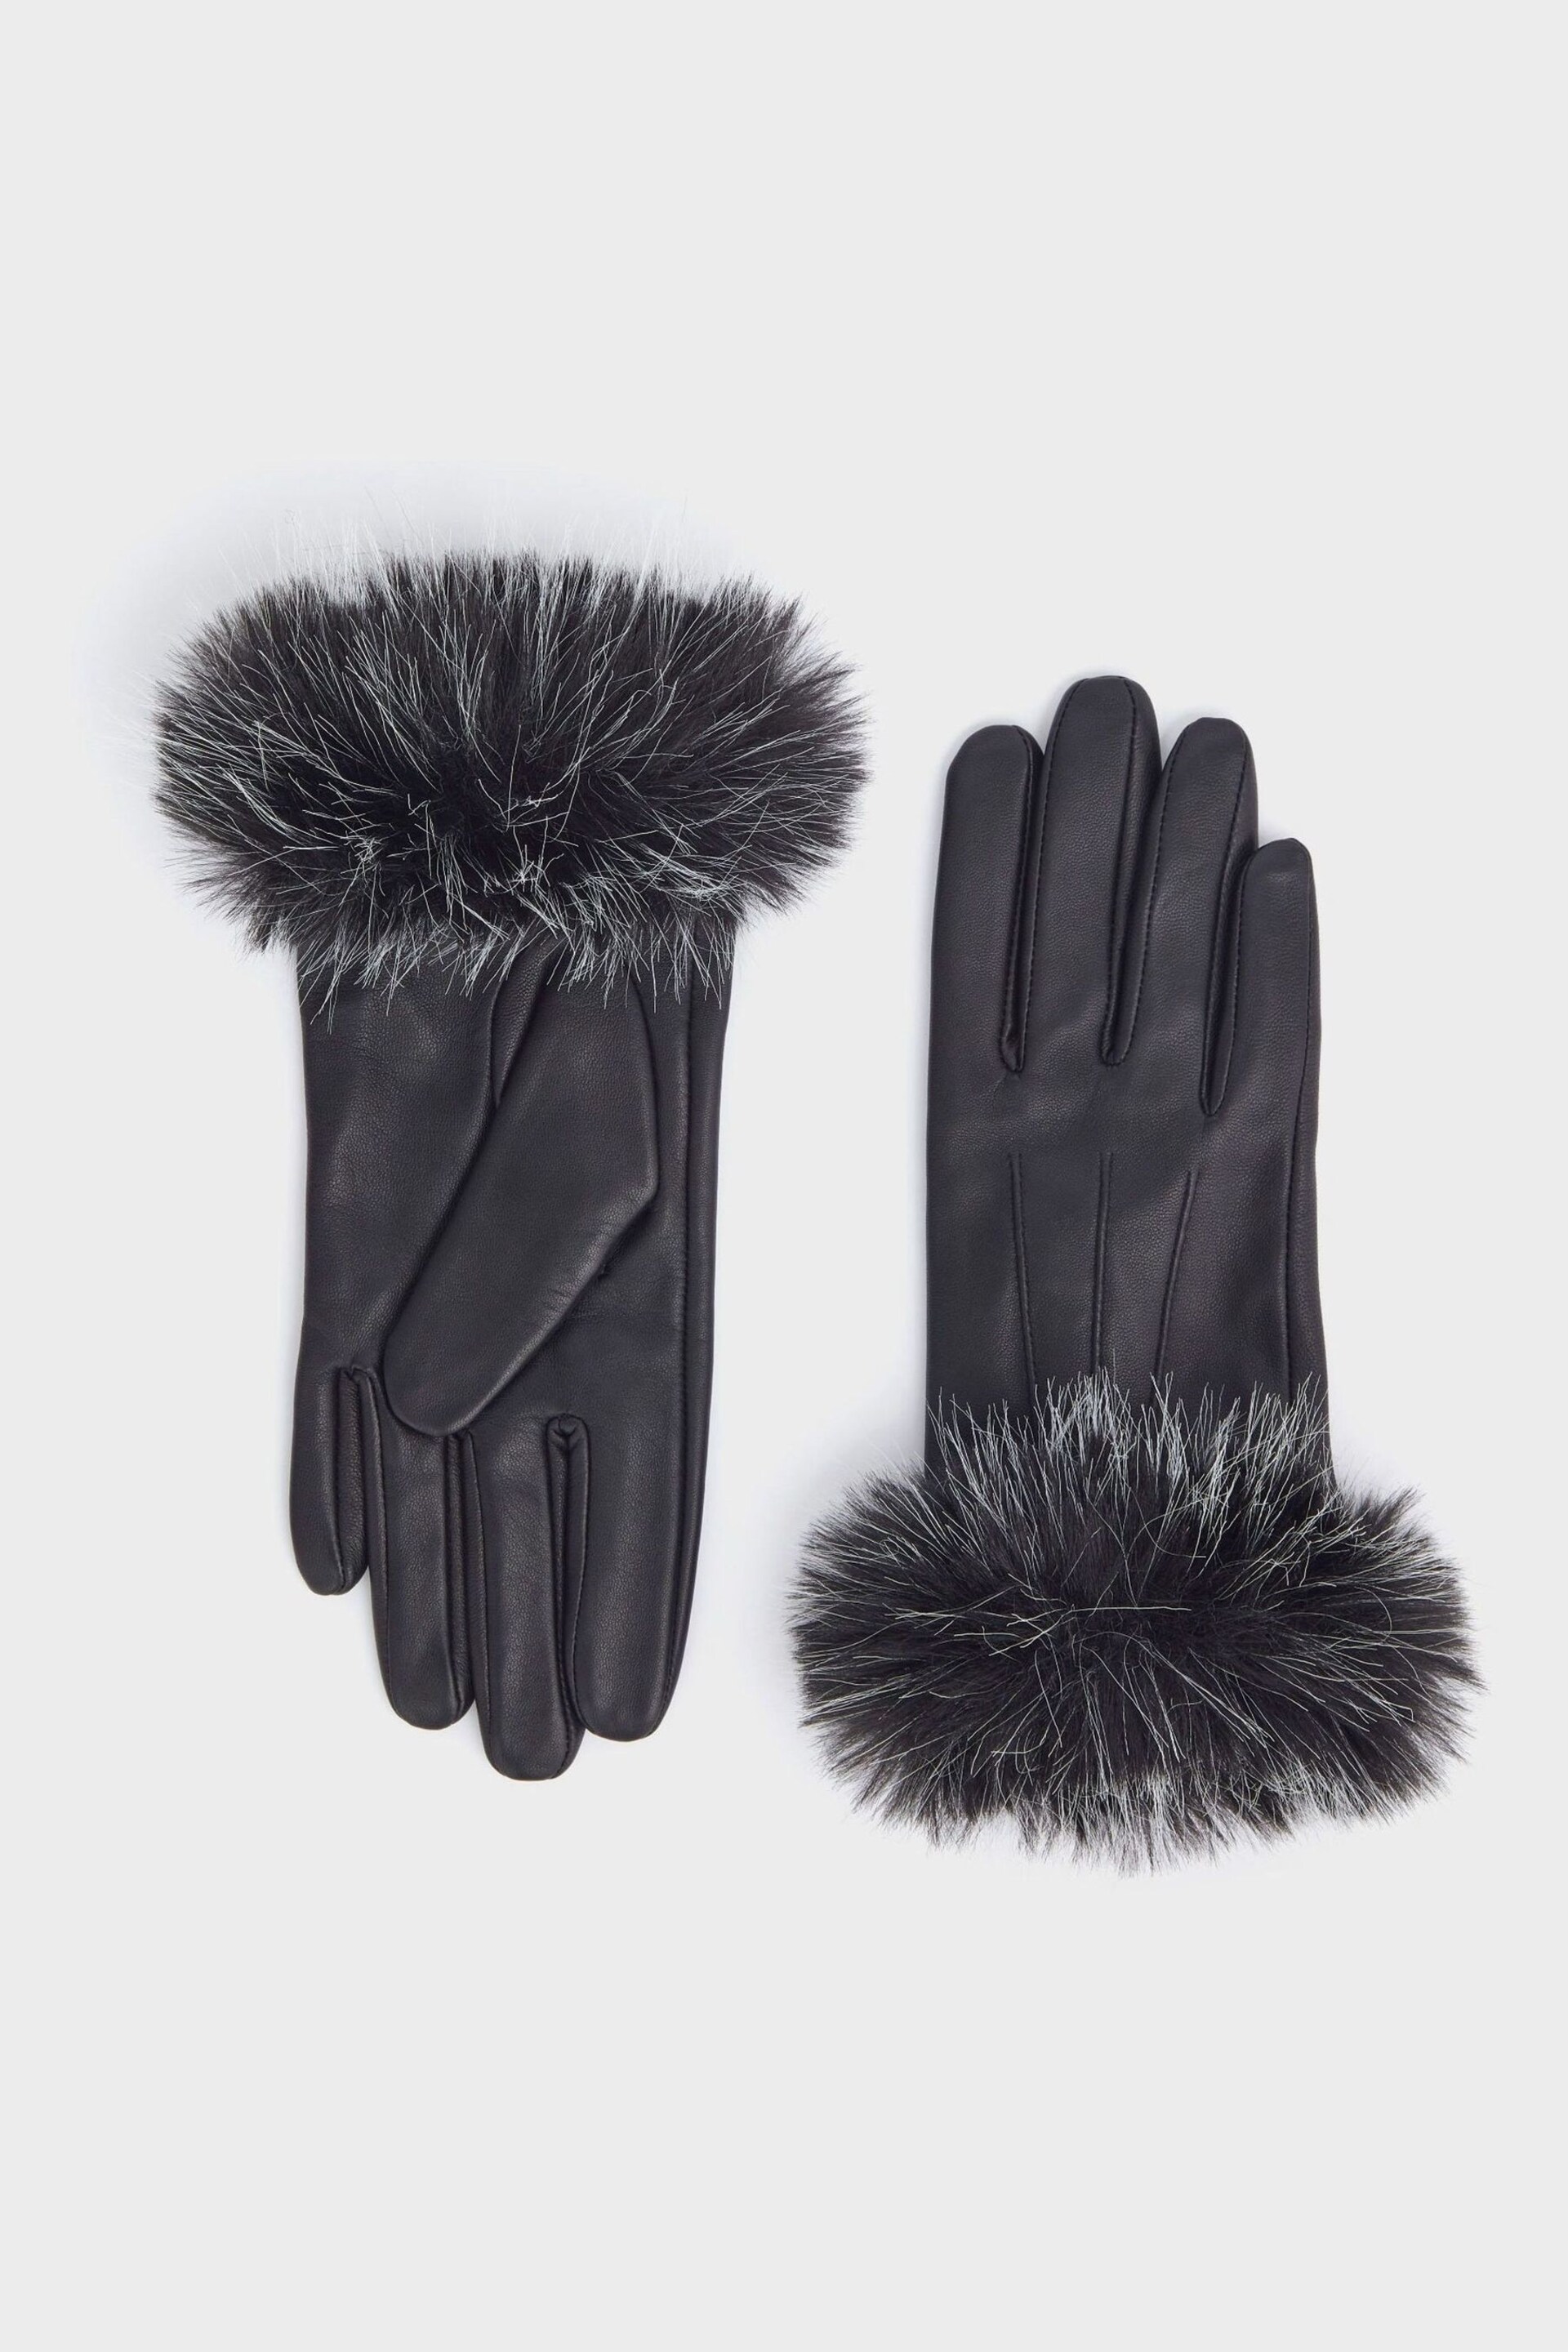 Osprey London The Penny Leather Gloves - Image 2 of 5